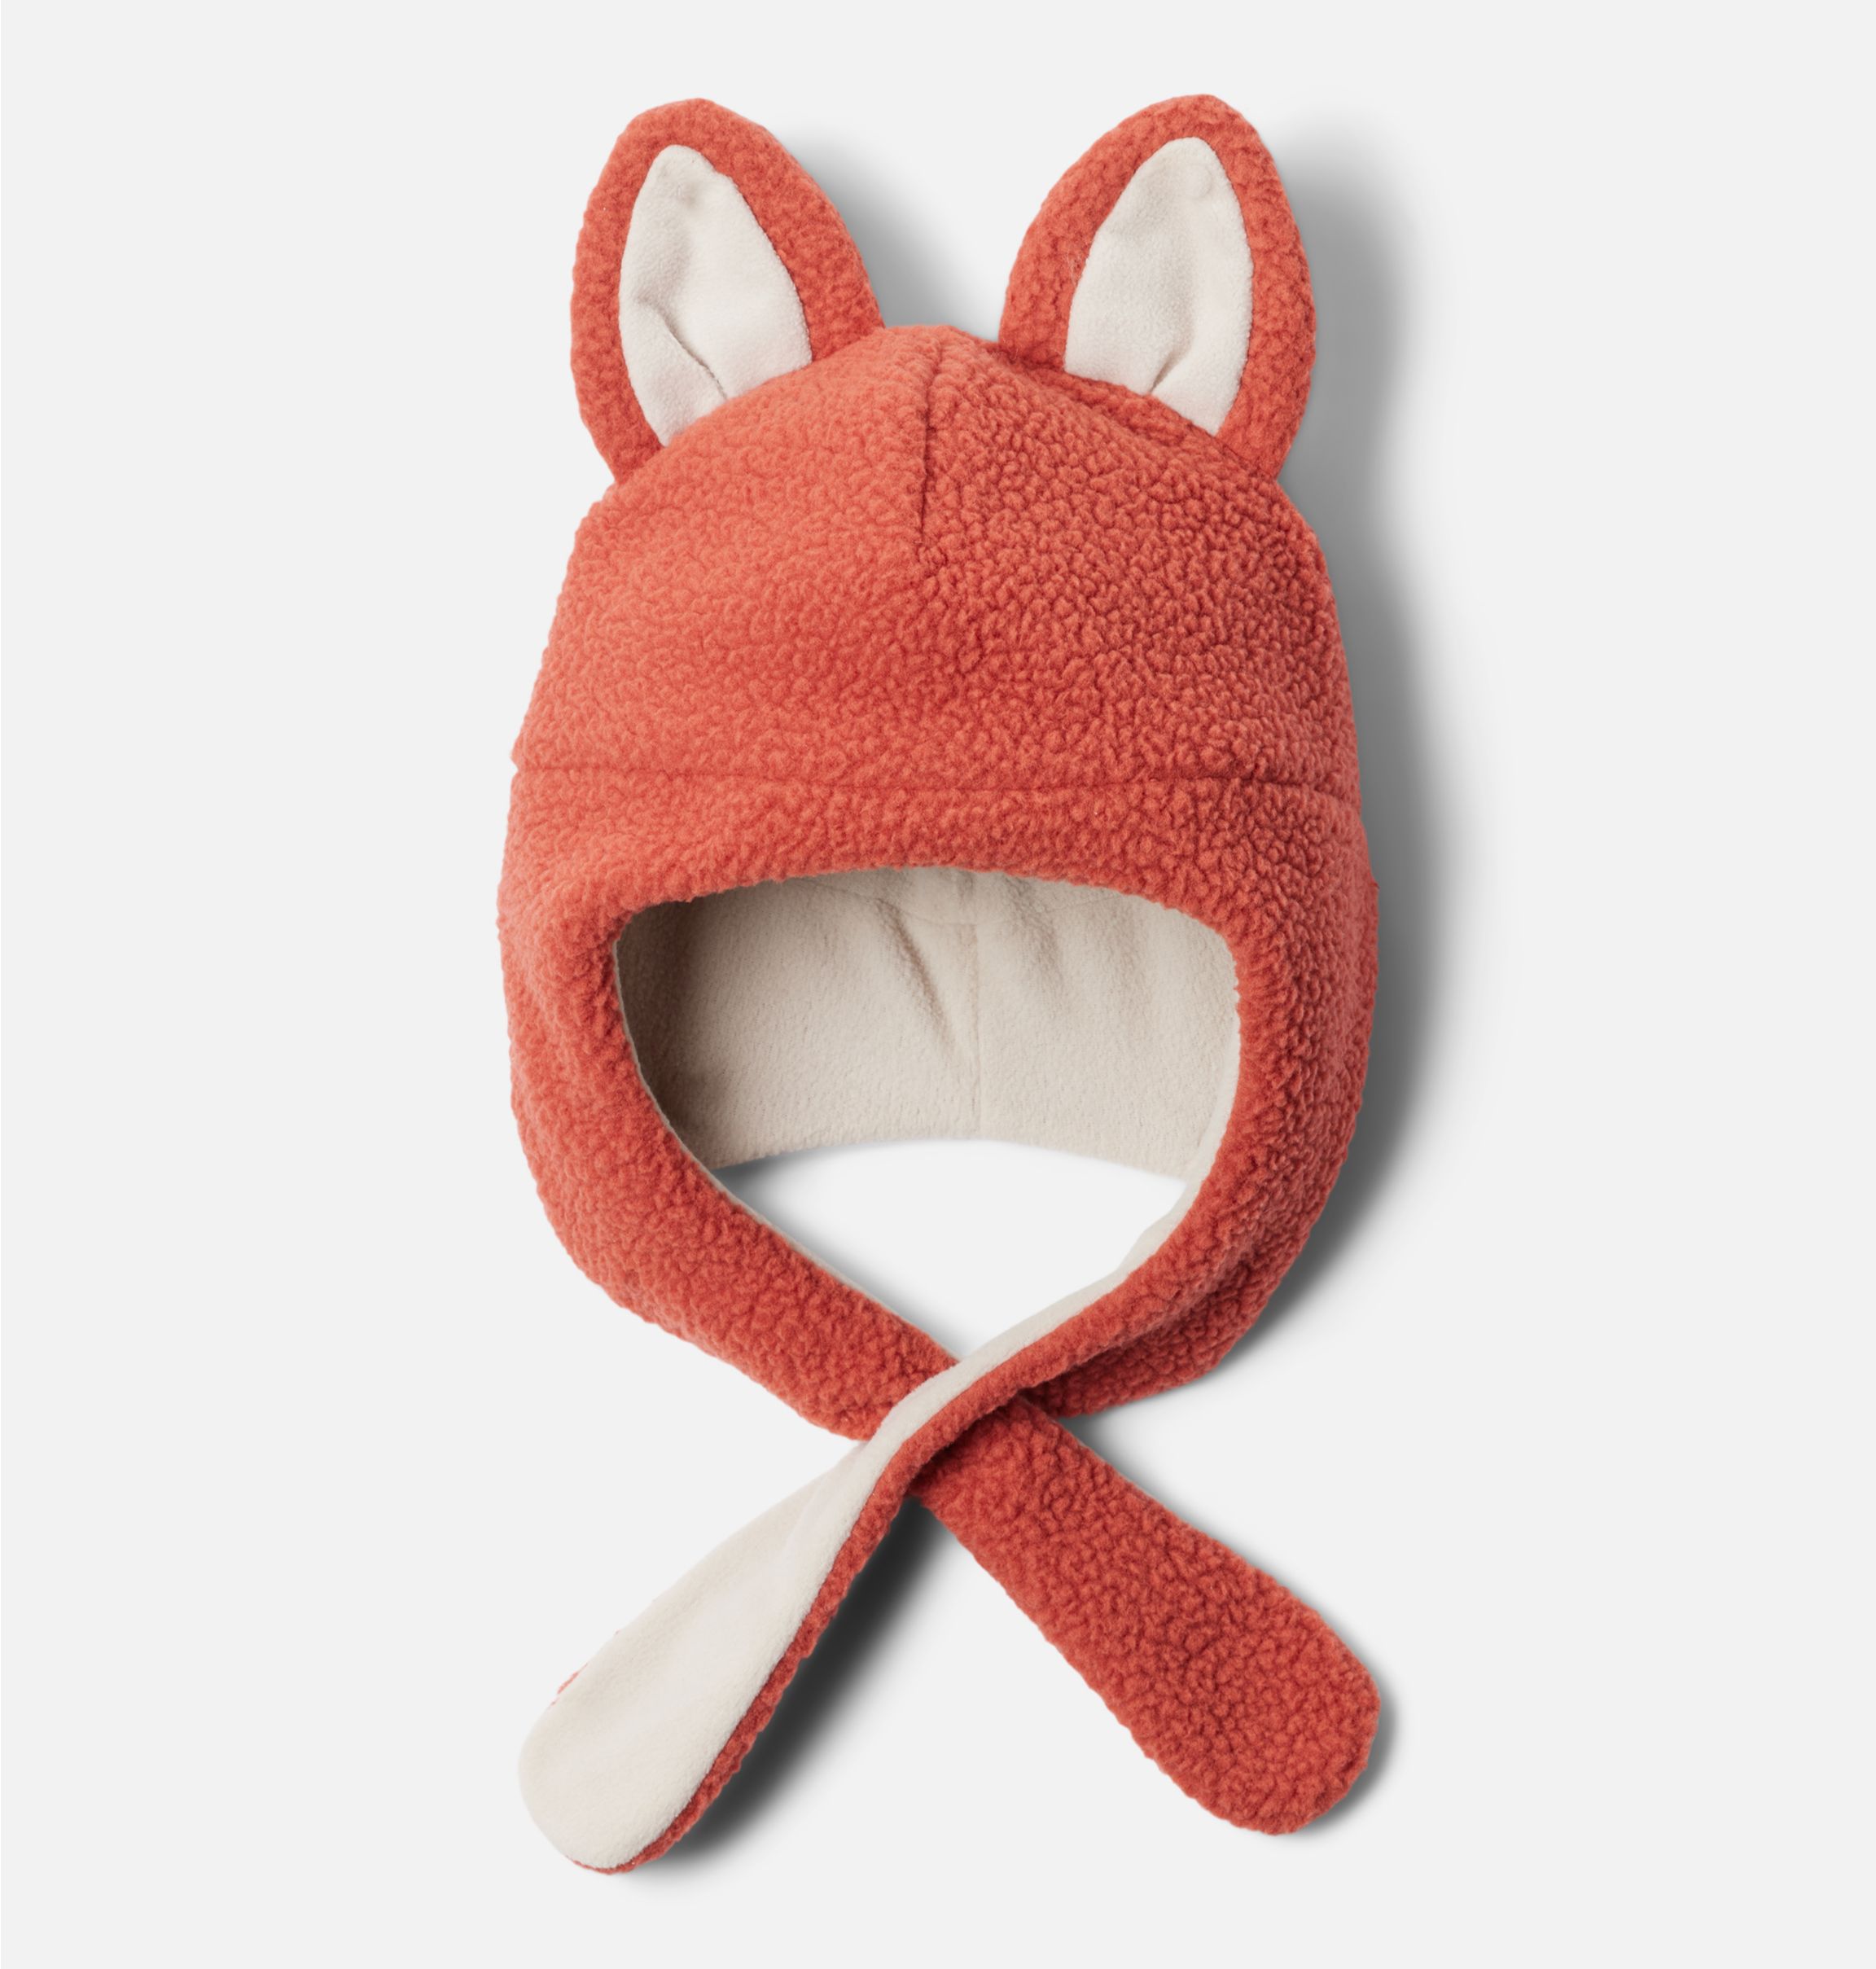 Mini Birth of Life Red Fox Mommy and Baby 7 Soft Plush